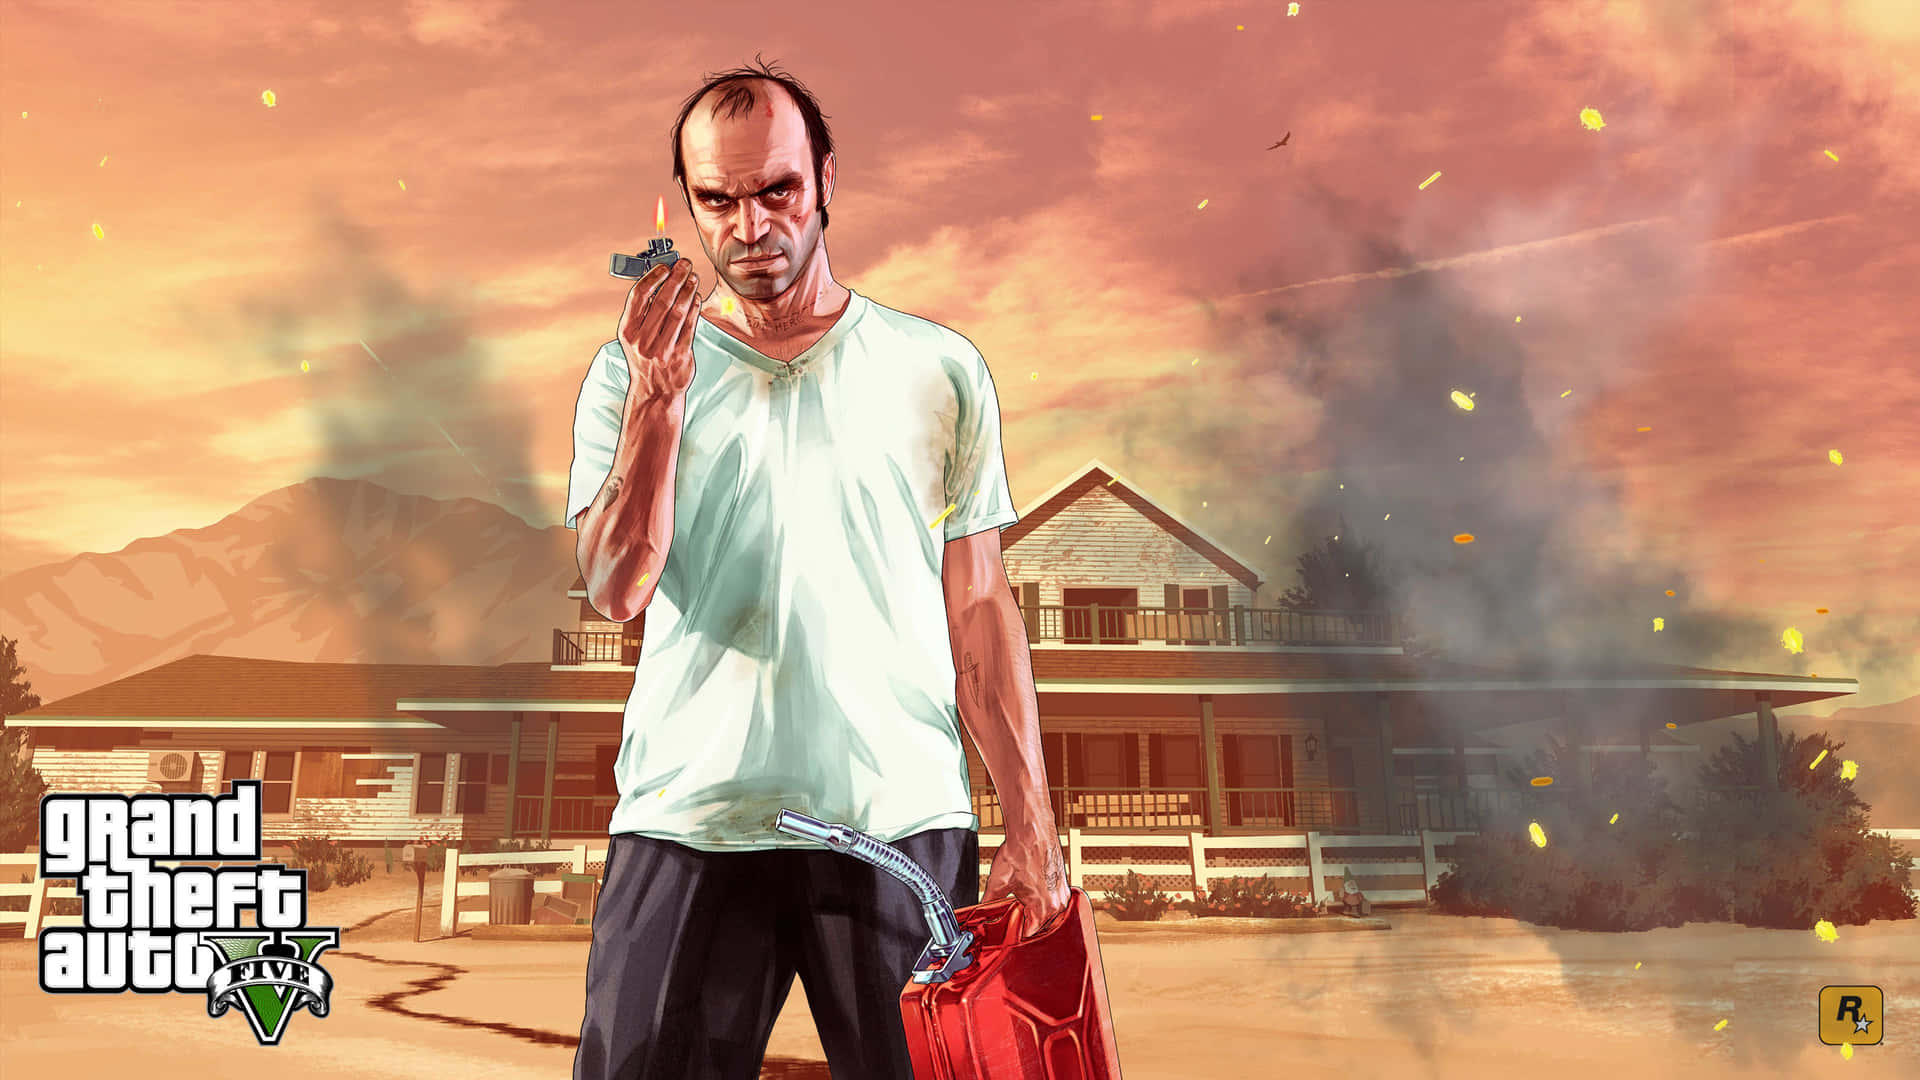 Experience an action-packed game in the world of Grand Theft Auto 5!